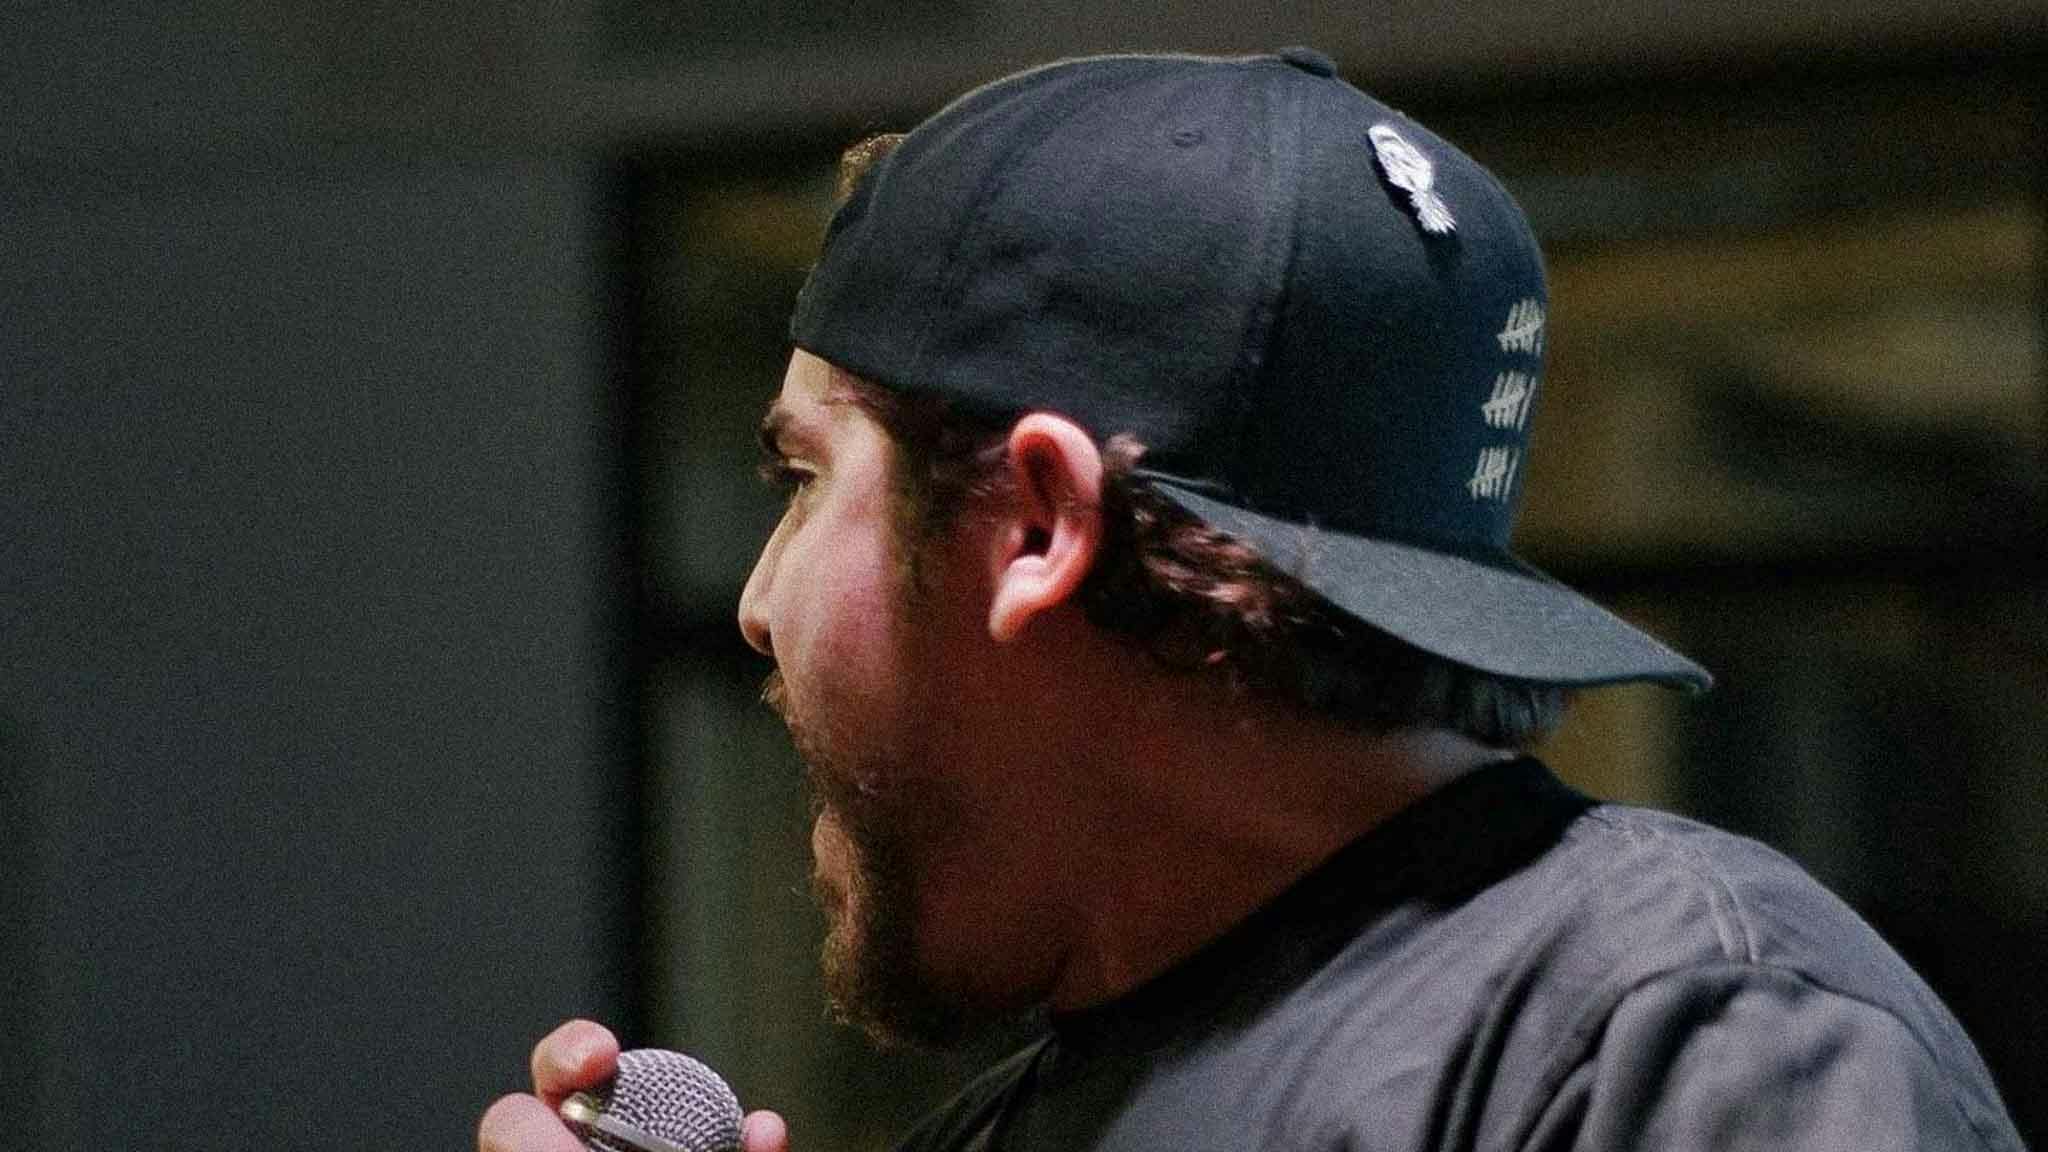 Louie C Rhymes performing live on stage wearing a backwards hat at an NFT conference.